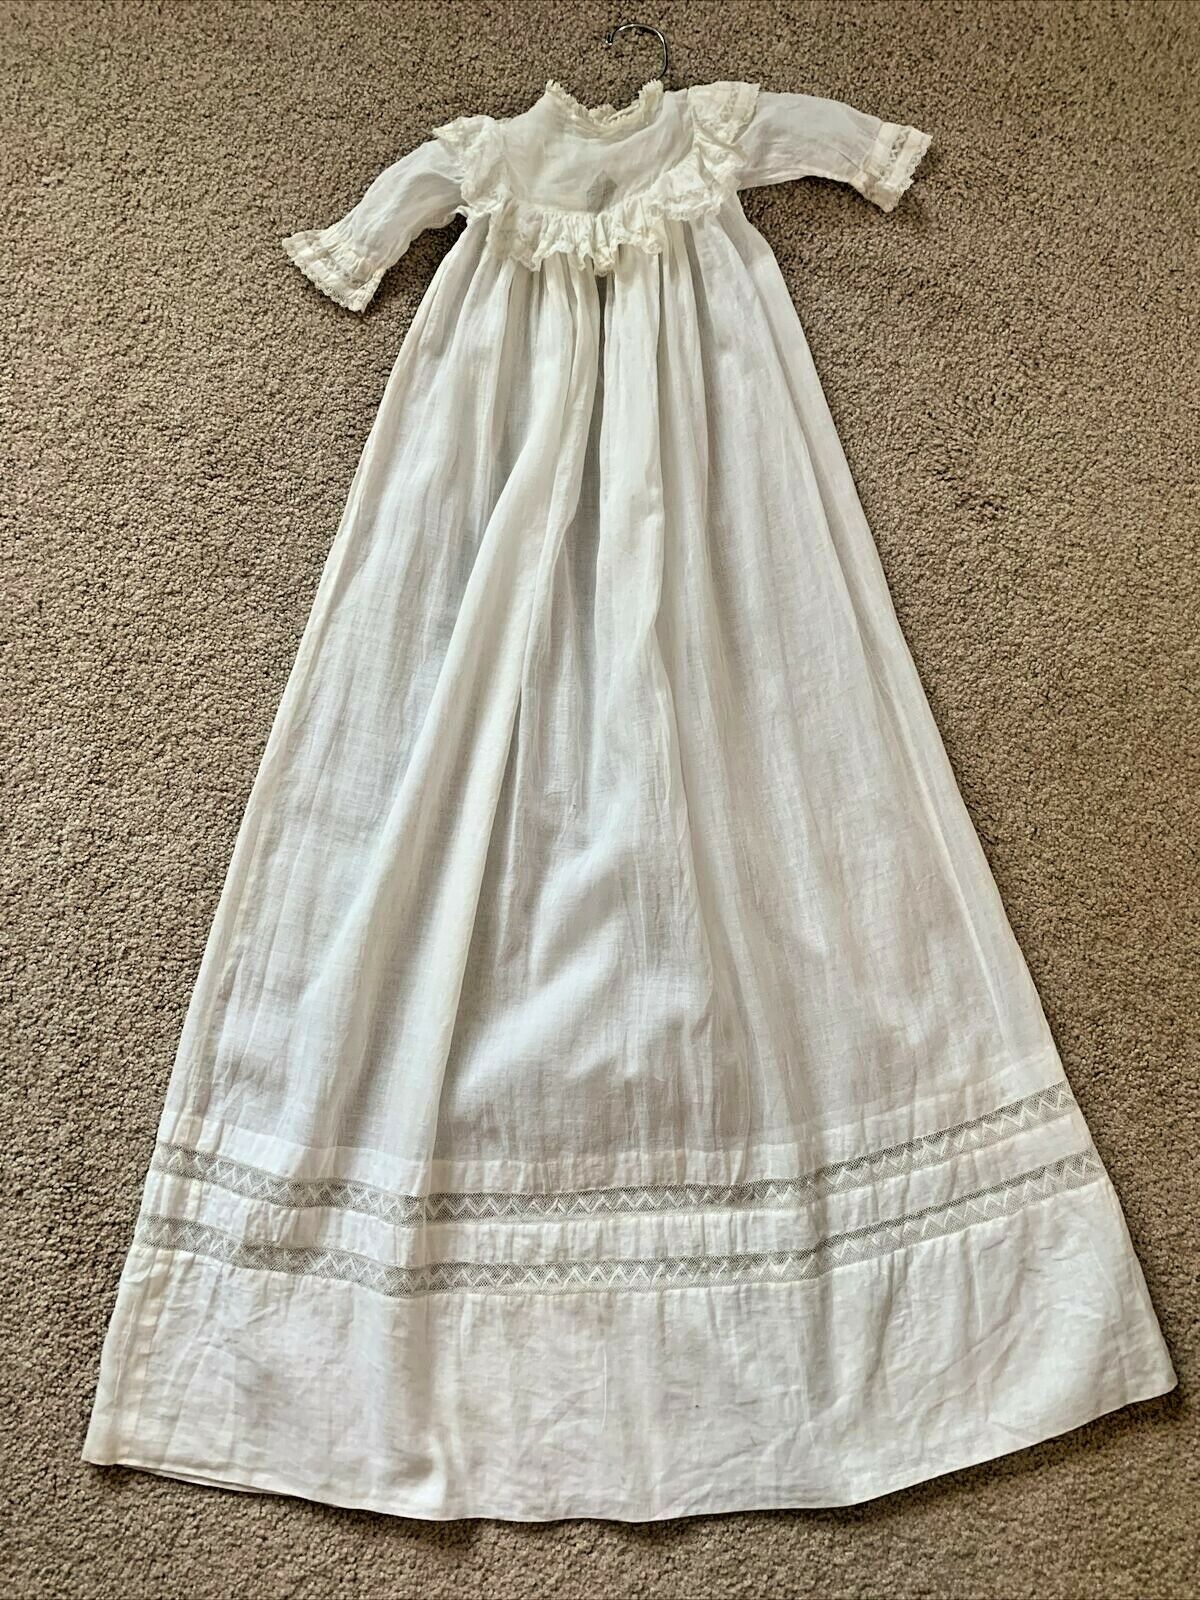 Vintage Antique Baby Baptismal Christening Gown Dress Lace & Tucks Victorian